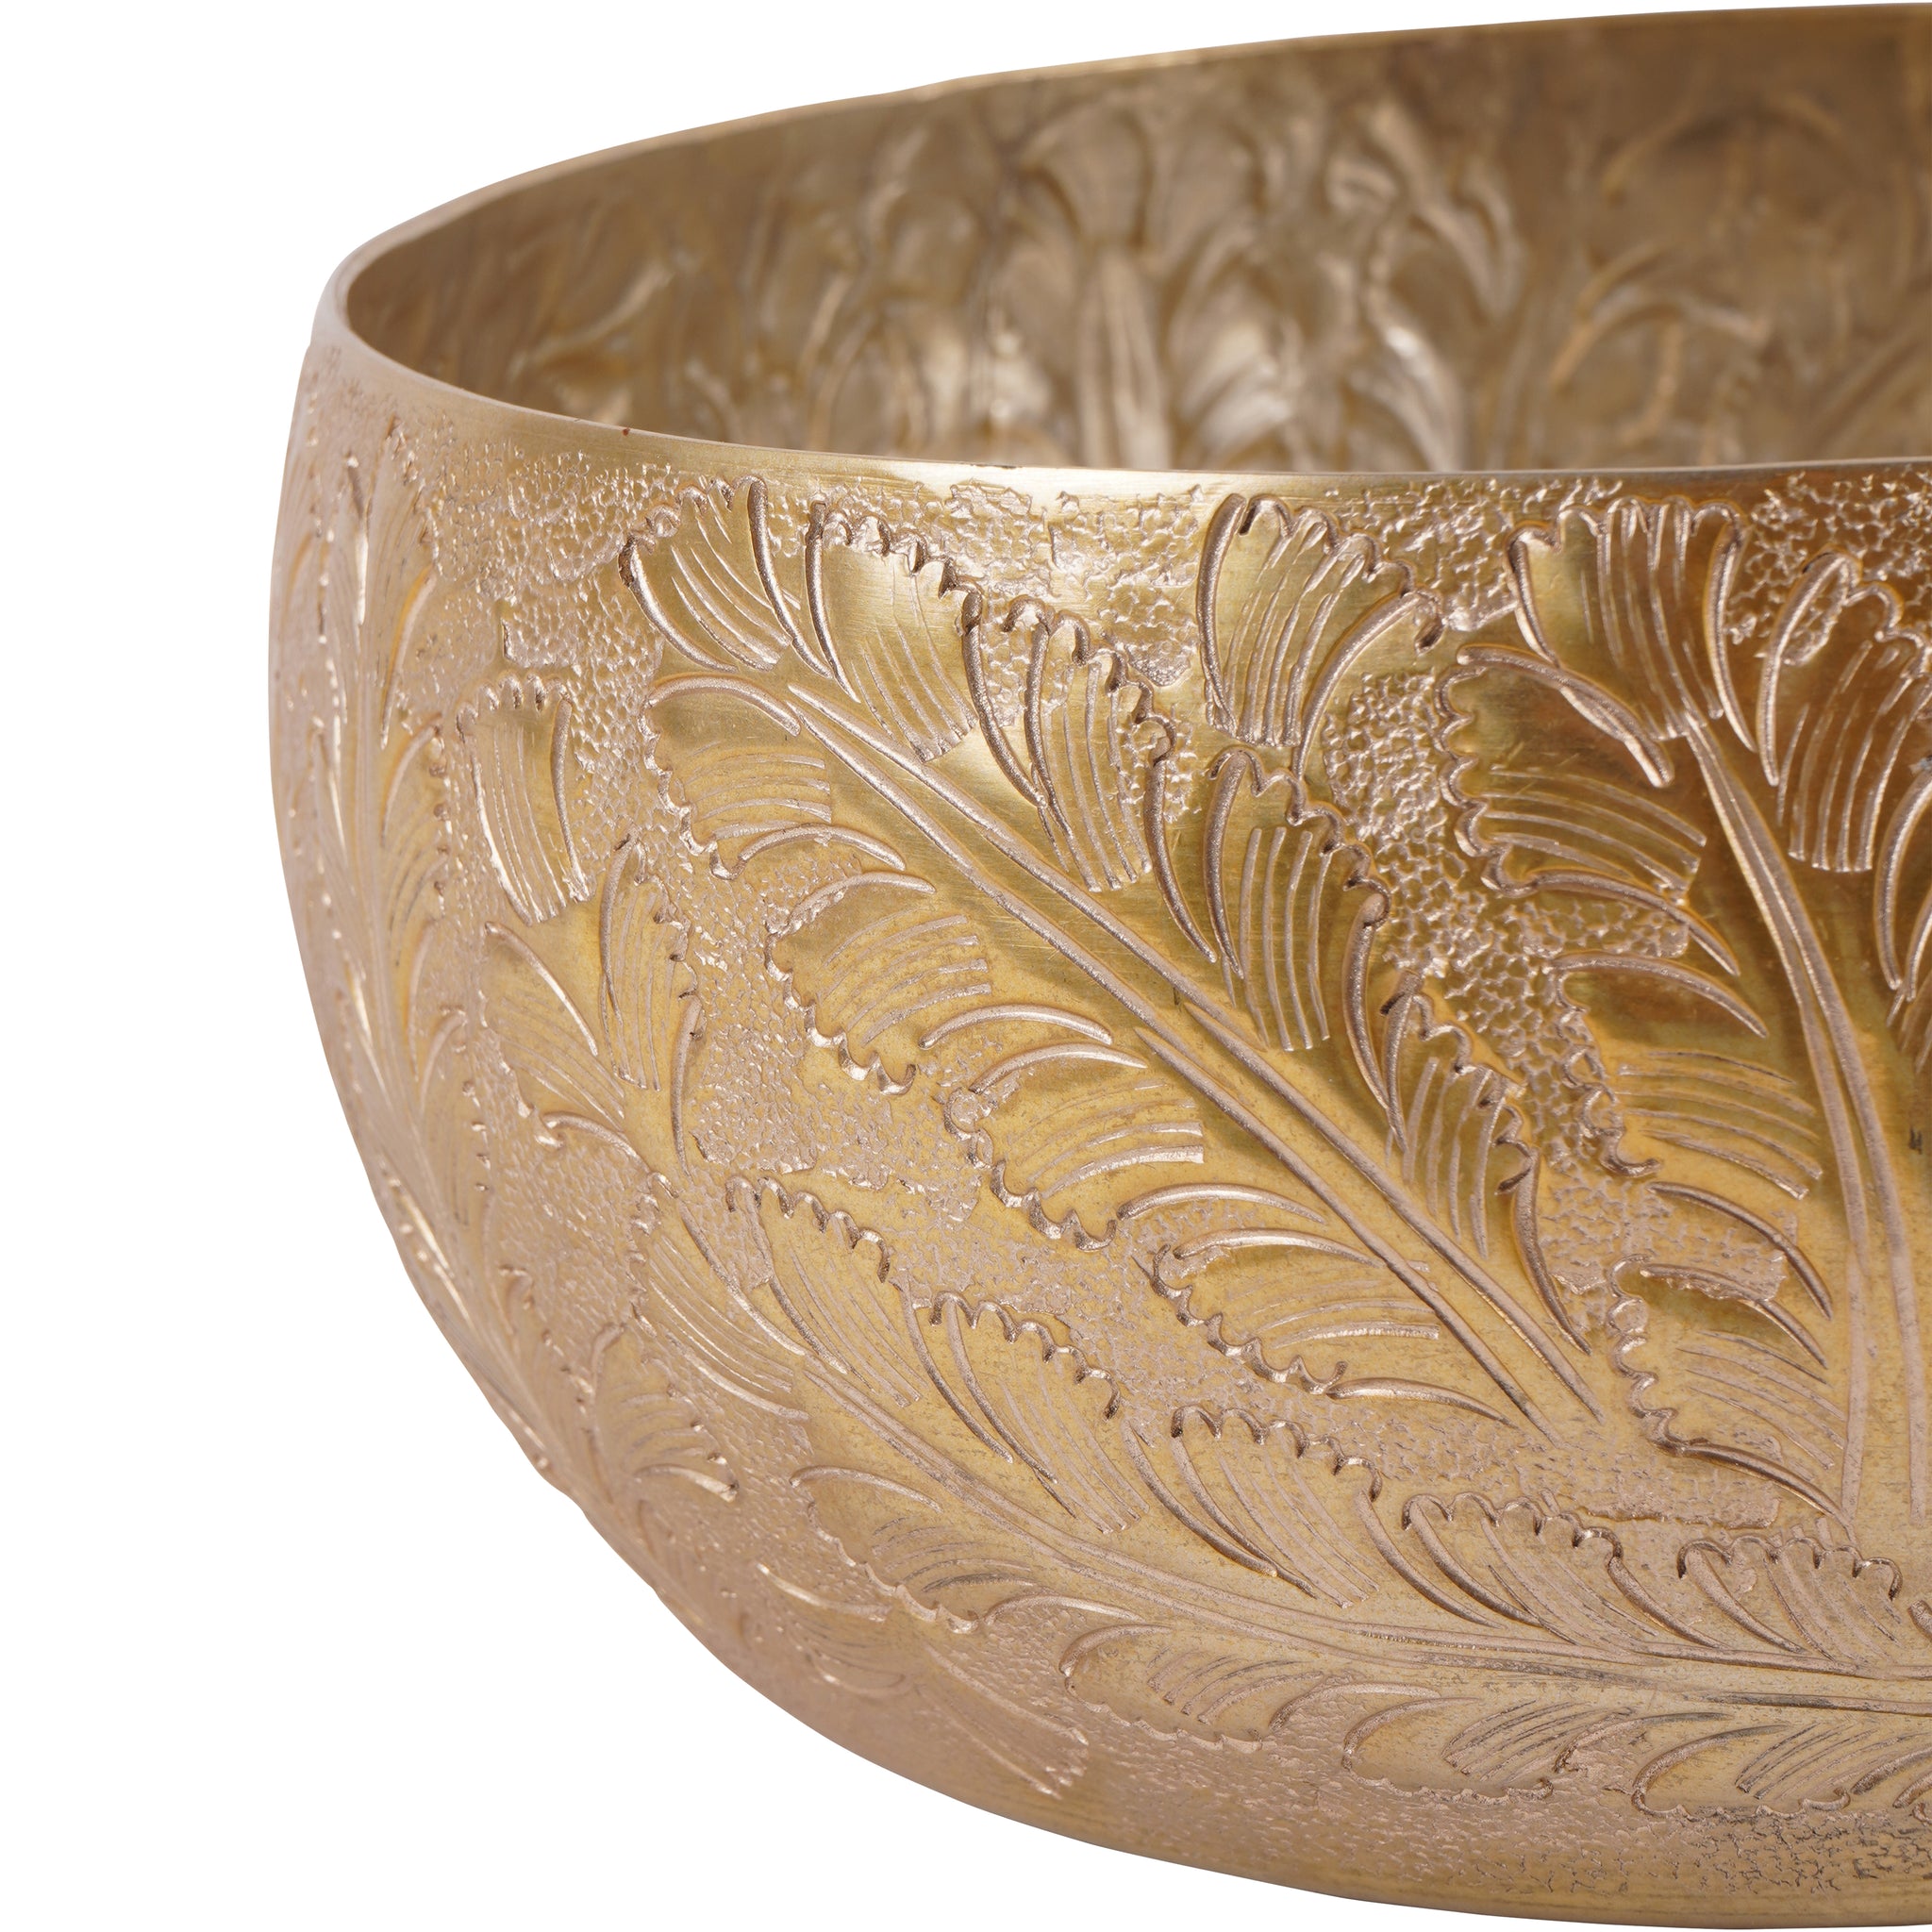 Winston Gold Leaf Embossed Round Convex Bowl Small